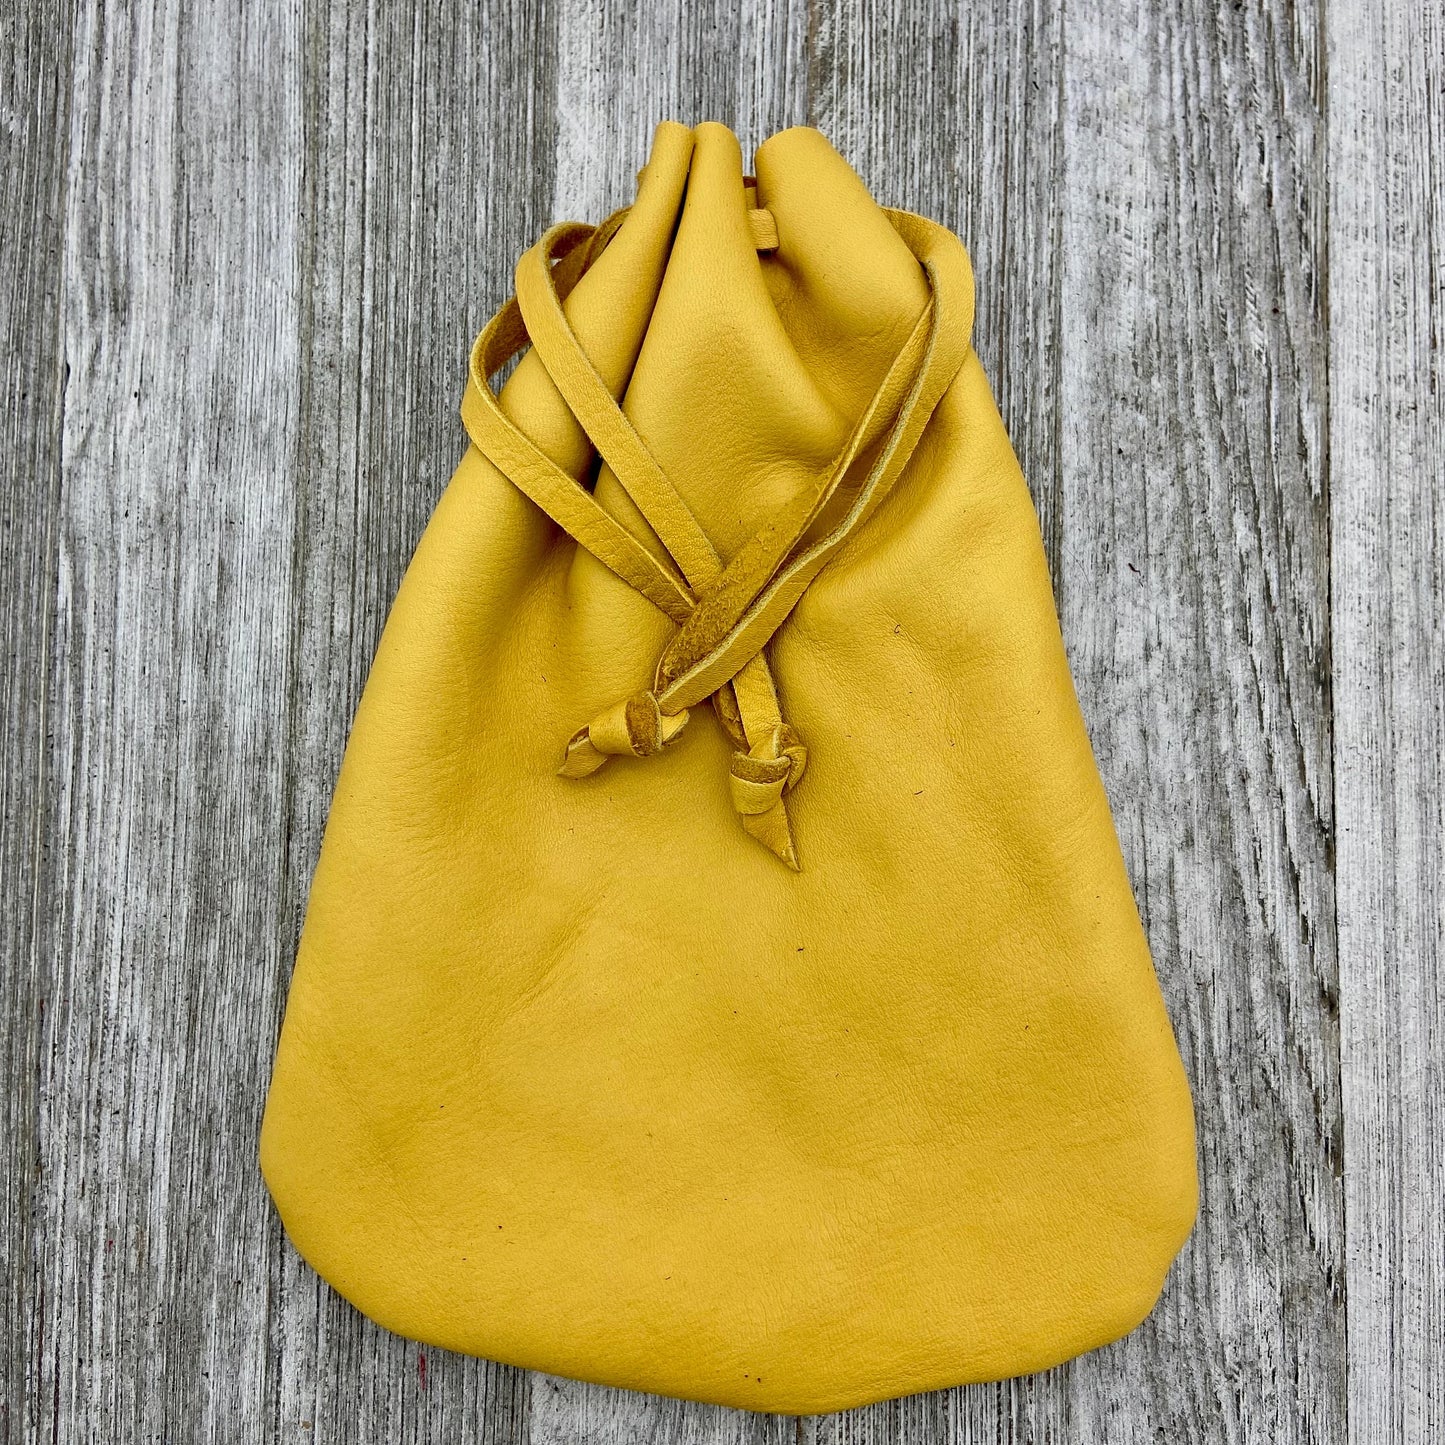 Large Colorful Deer Skin Drawstring Pouch (9" x 7.25")